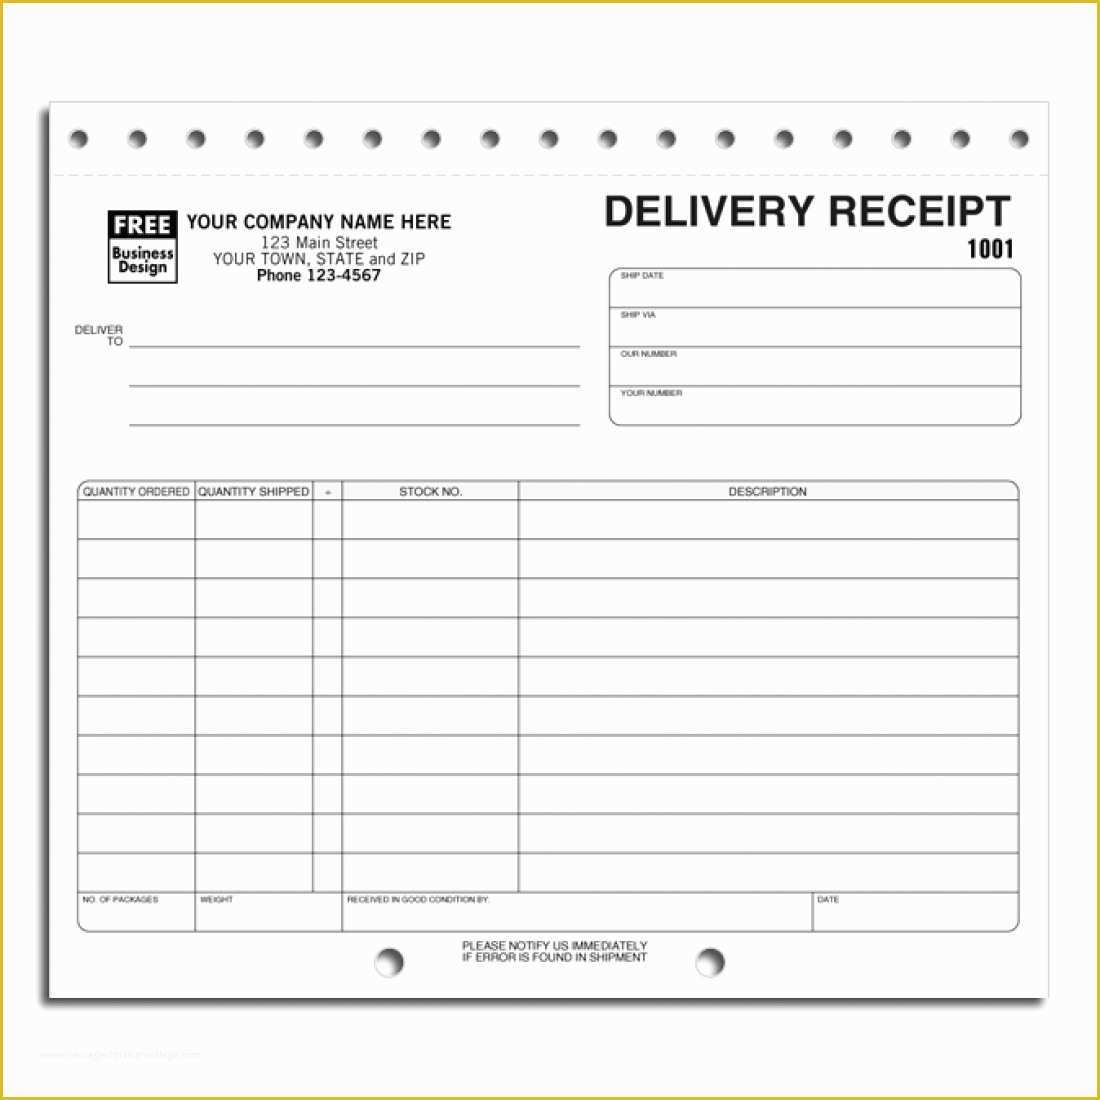 Warehouse Receipt Template Free Of Preprinted Delivery Receipt forms